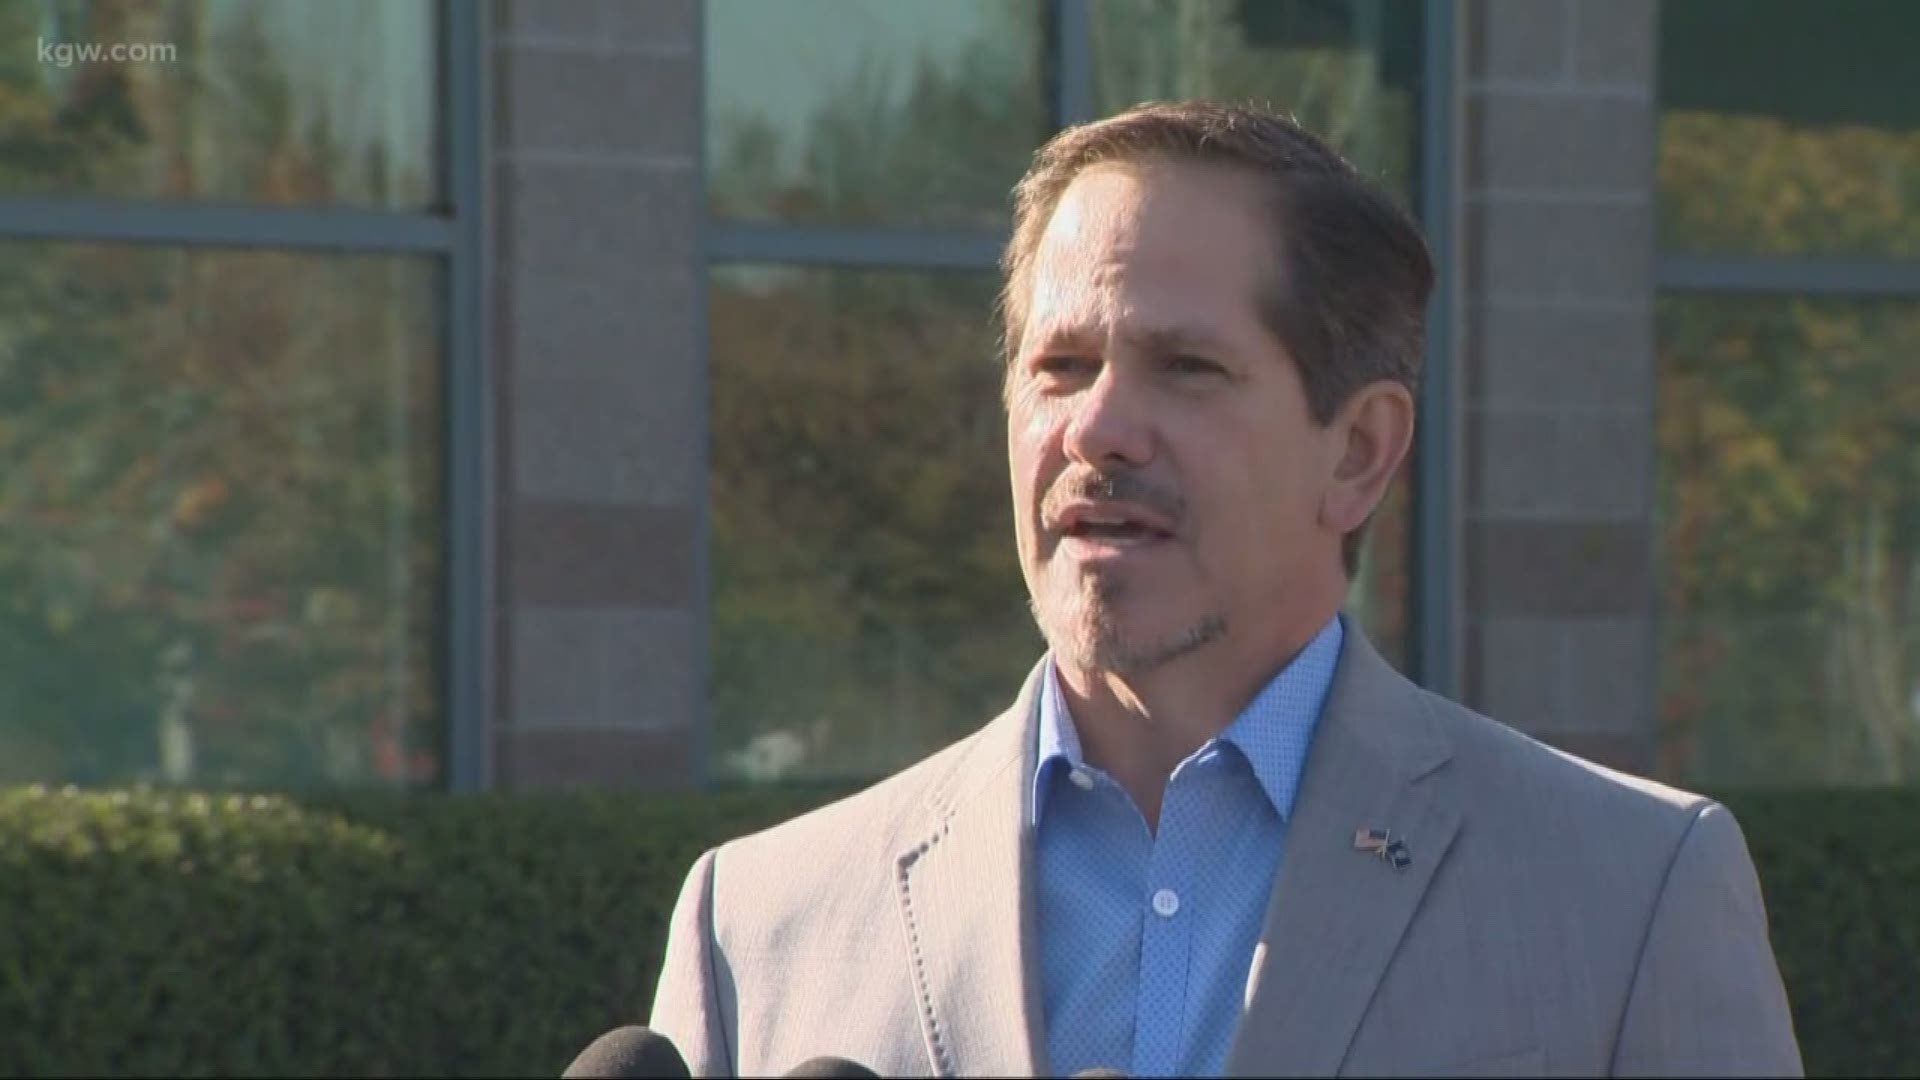 Republican governor candidate Knute Buehler wants to use the empty Wapato jail to house the homeless and called on his opponent Kate Brown to also endorse the plan.